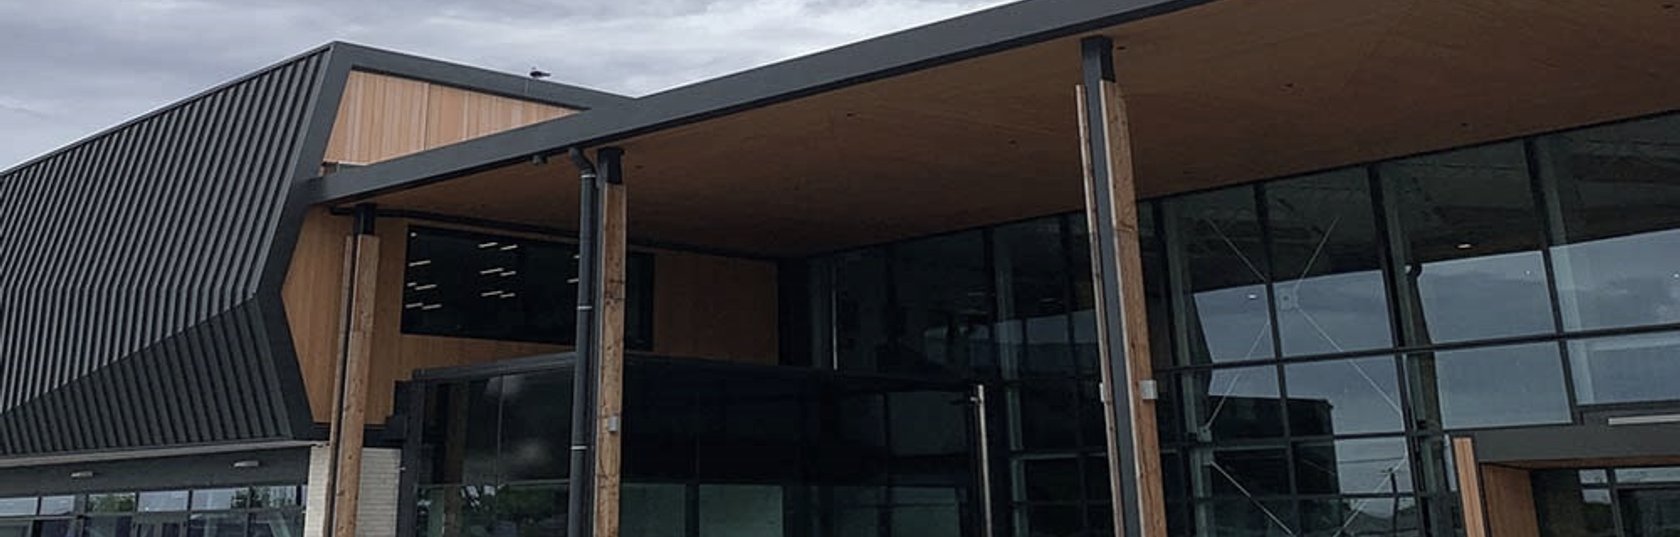 InnoClad composite timber cladding delivers a clean finish to Christchurch school